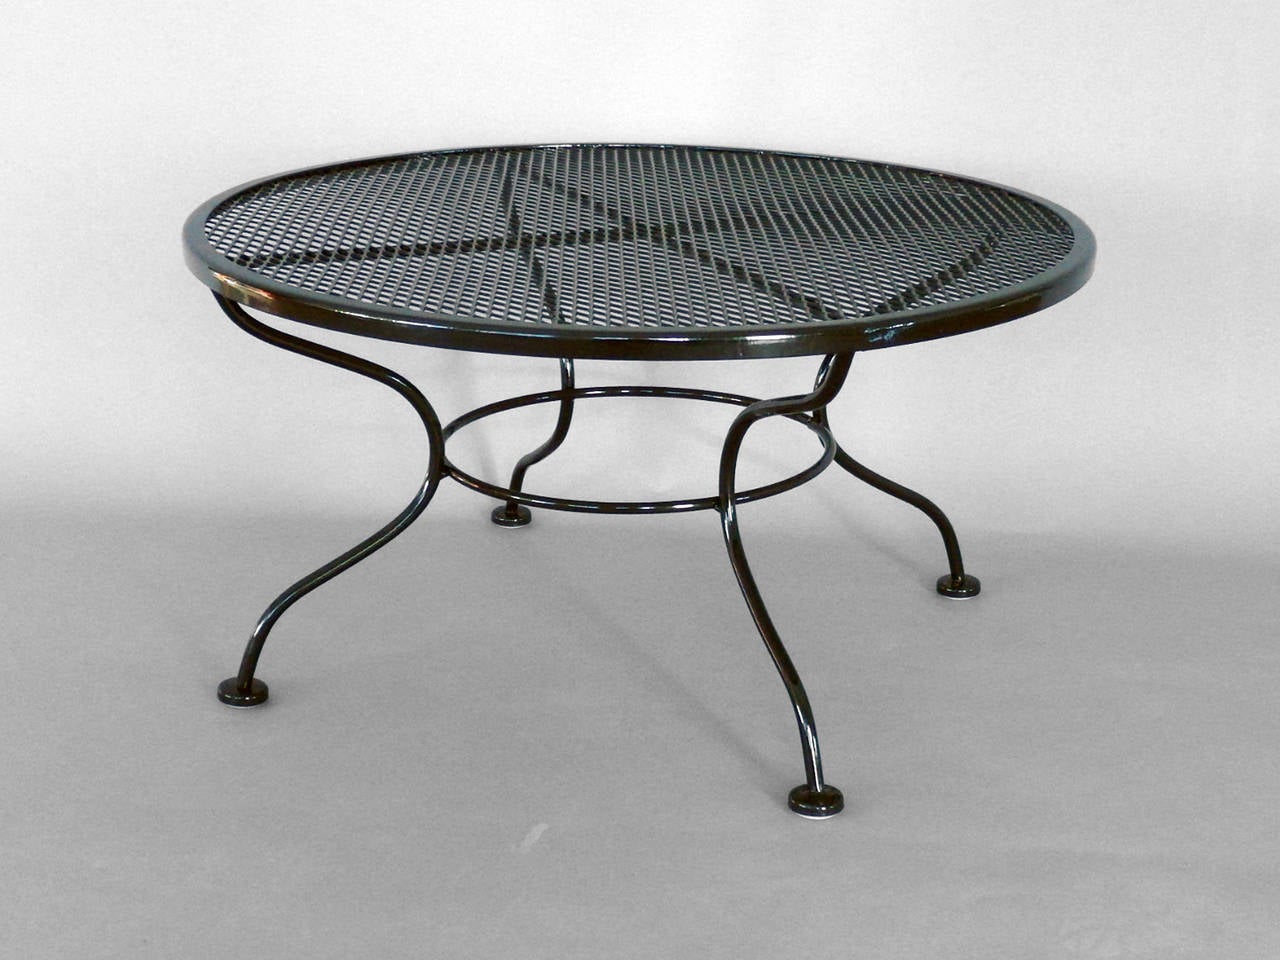 Wrought iron coffee or occasional table by John Woodard for Woodard.